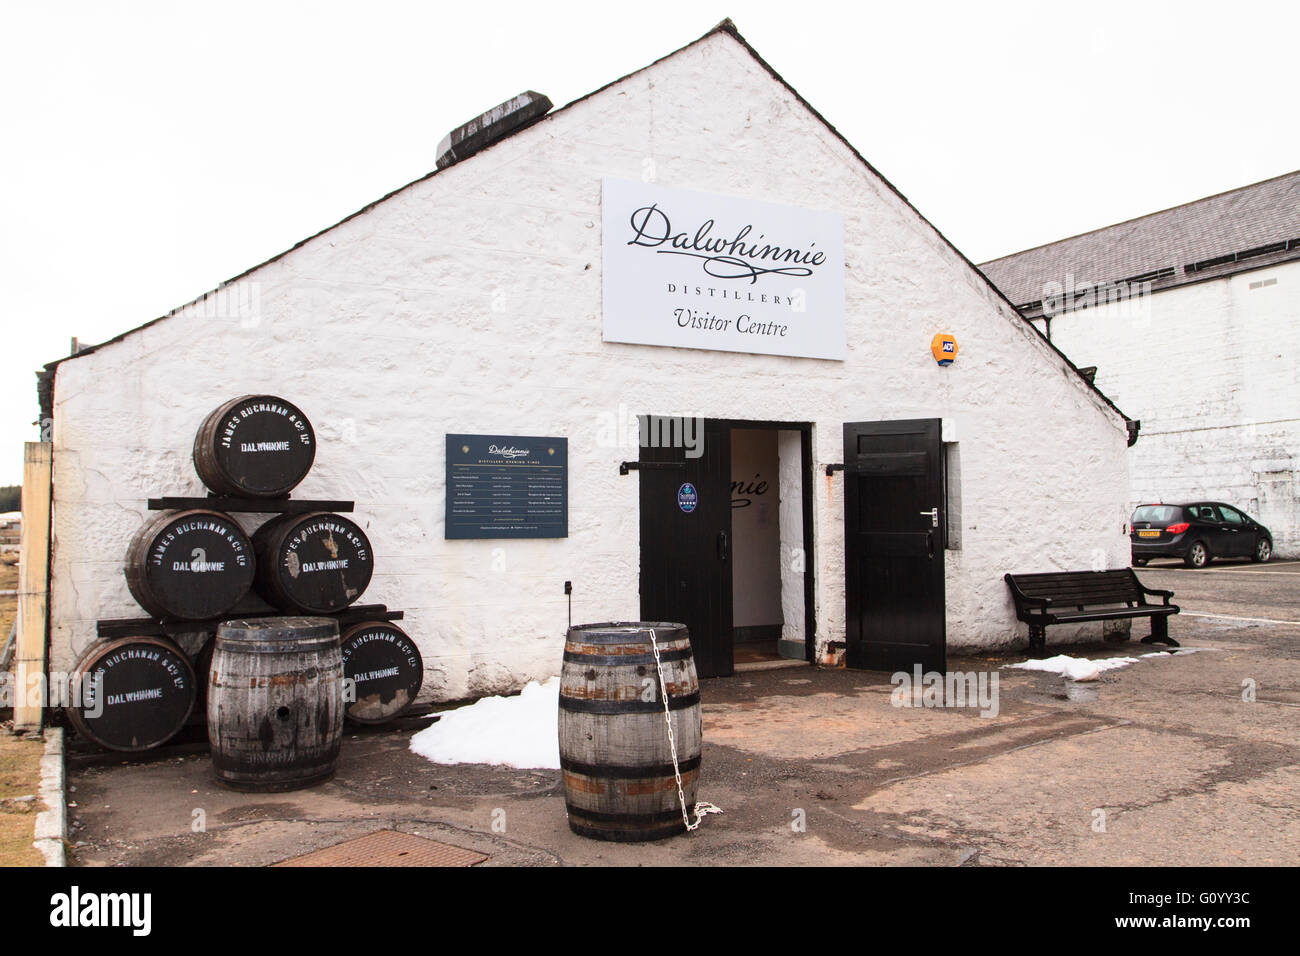 Exterior of Dalwhinnie Distillery visitor center in Highland, Scotland, the highest distillery in highlands. Stock Photo